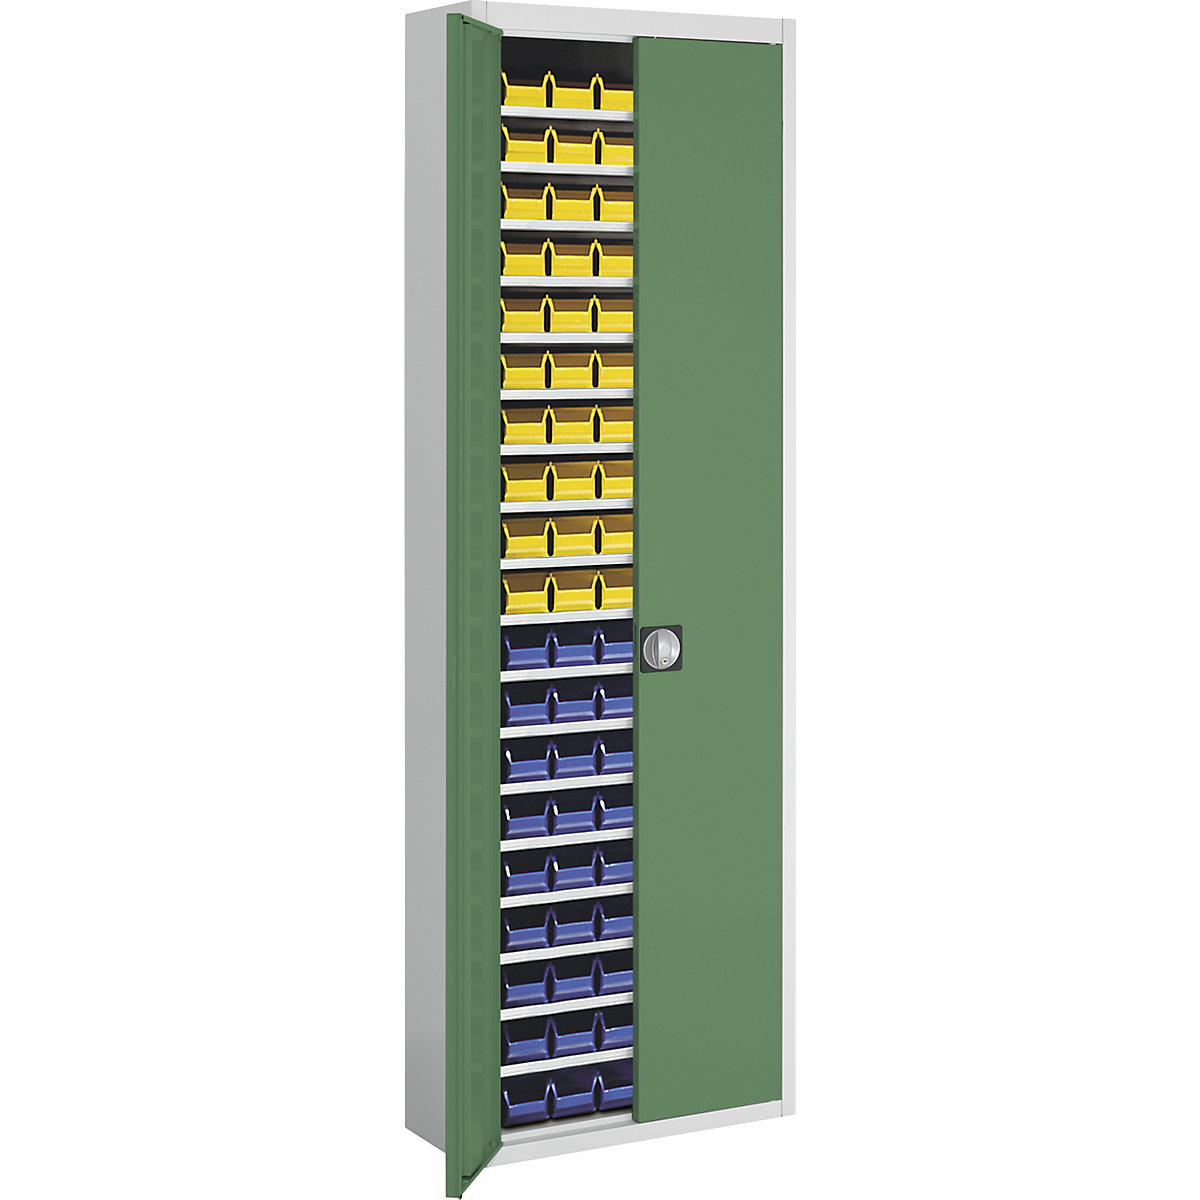 Storage cupboard with open fronted storage bins – mauser, HxWxD 2150 x 680 x 280 mm, two-colour, grey body, green doors, 114 bins-13